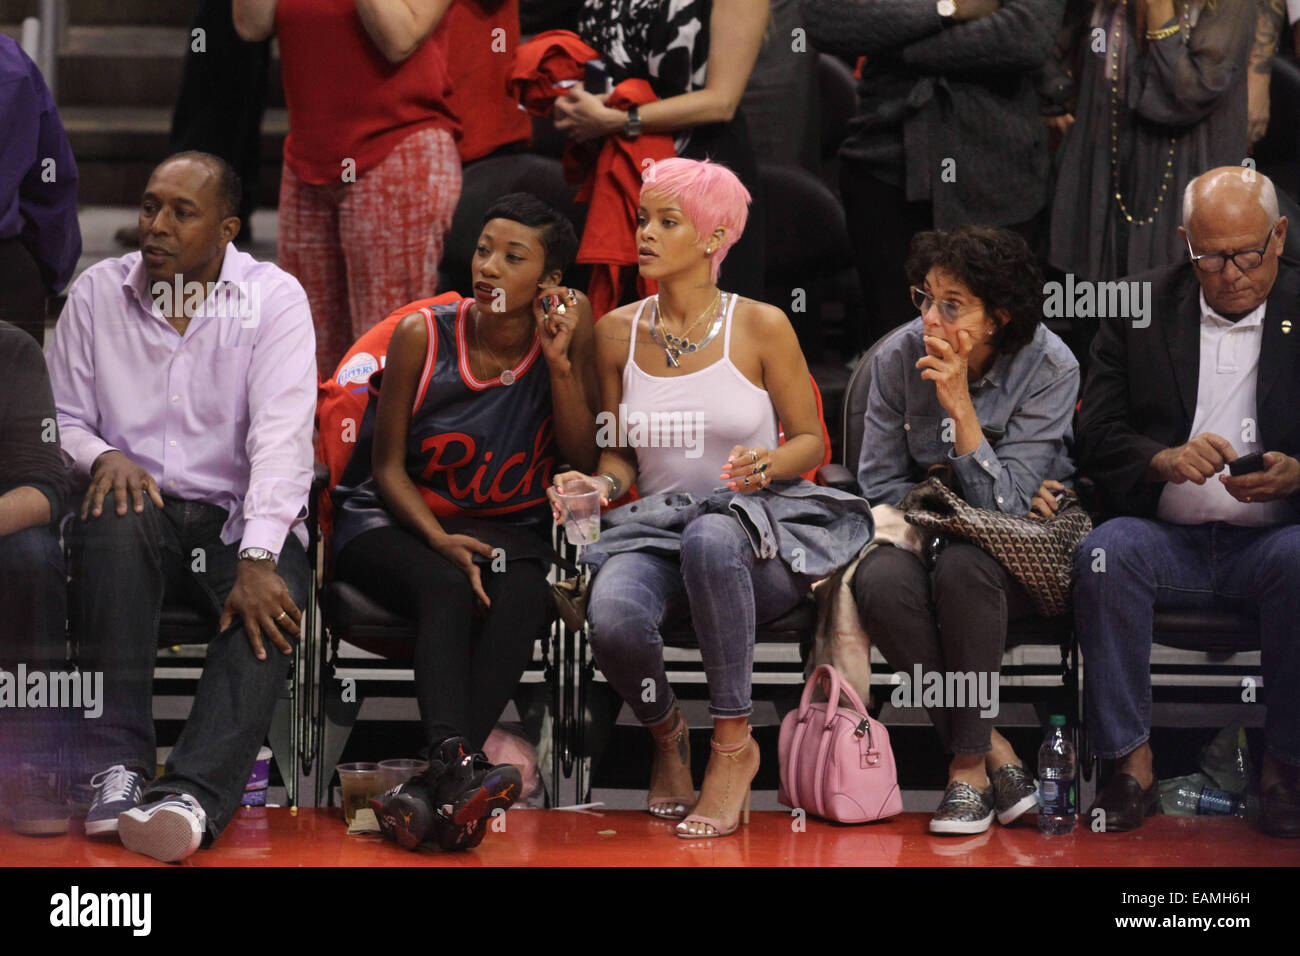 Rihanna sports a new pink hairstyle as she and a friend cheer on the Los  Angeles Clippers NBA basketball game against The Oklahoma City Thunder. The  Thunder defeated the Clippers by the